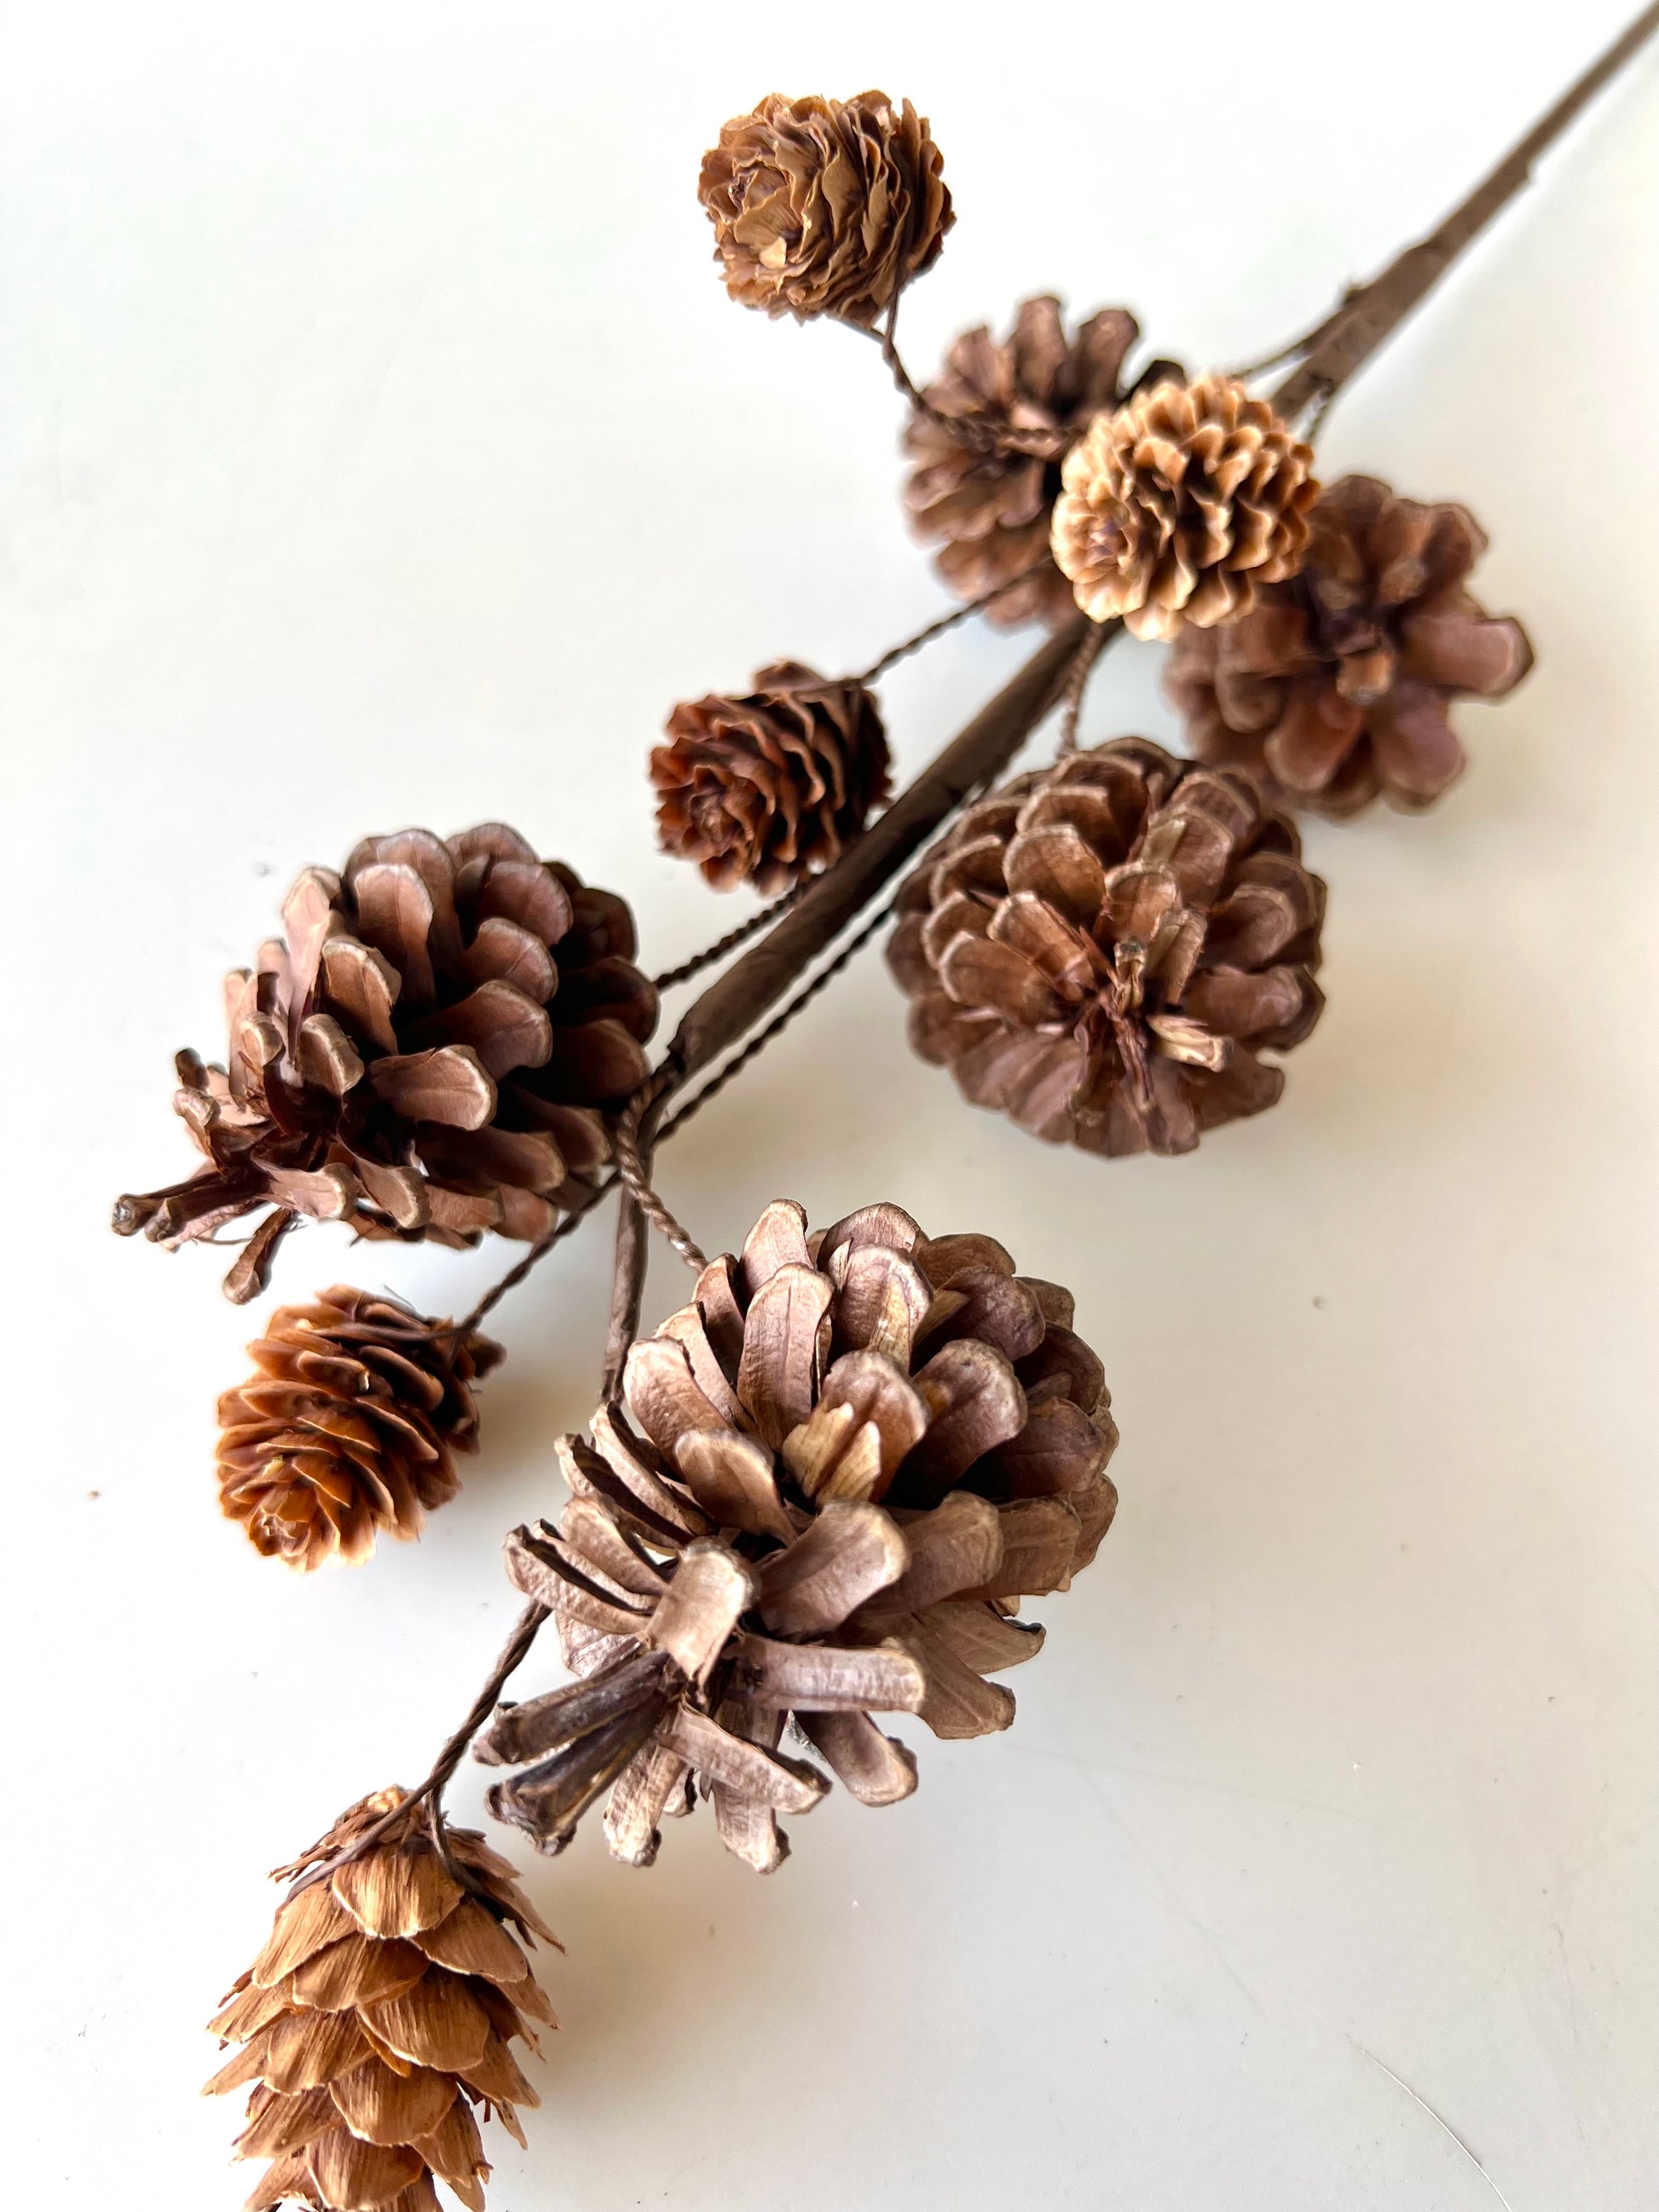 How to Make Quick and Easy Pine Cone Picks  Pine cone decorations,  Christmas pine cones, Pine cone crafts